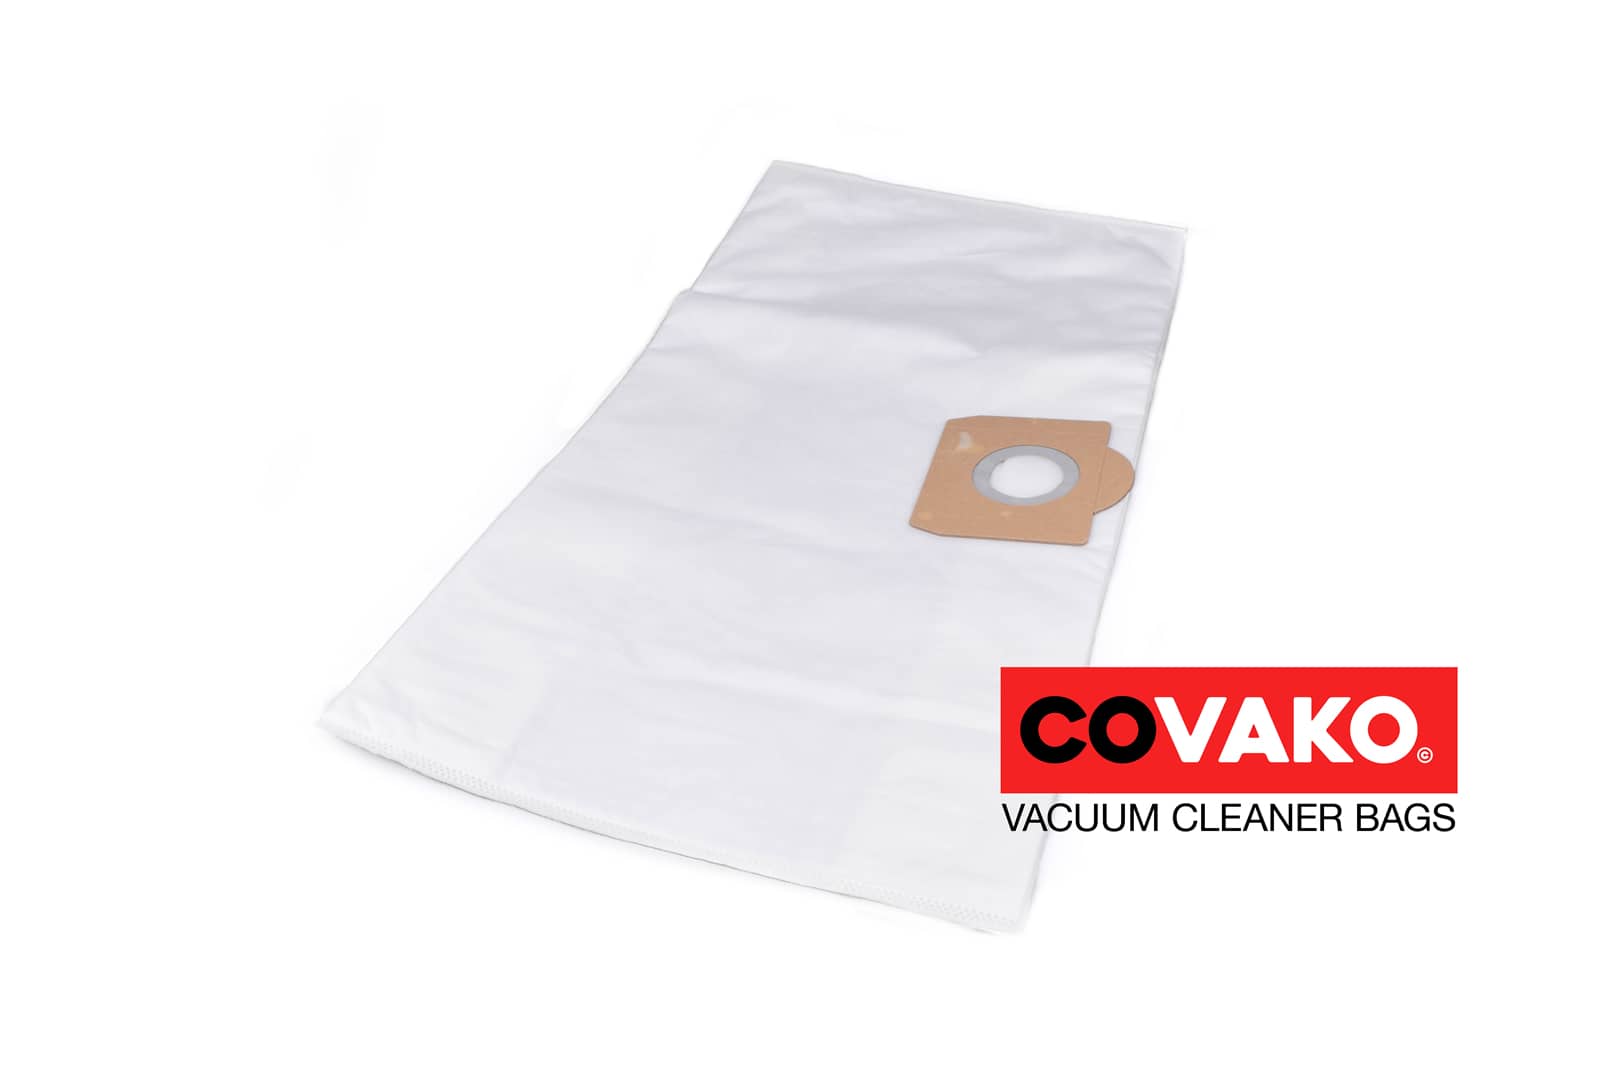 Gansow GS 27 EP / Synthesis - Gansow vacuum cleaner bags